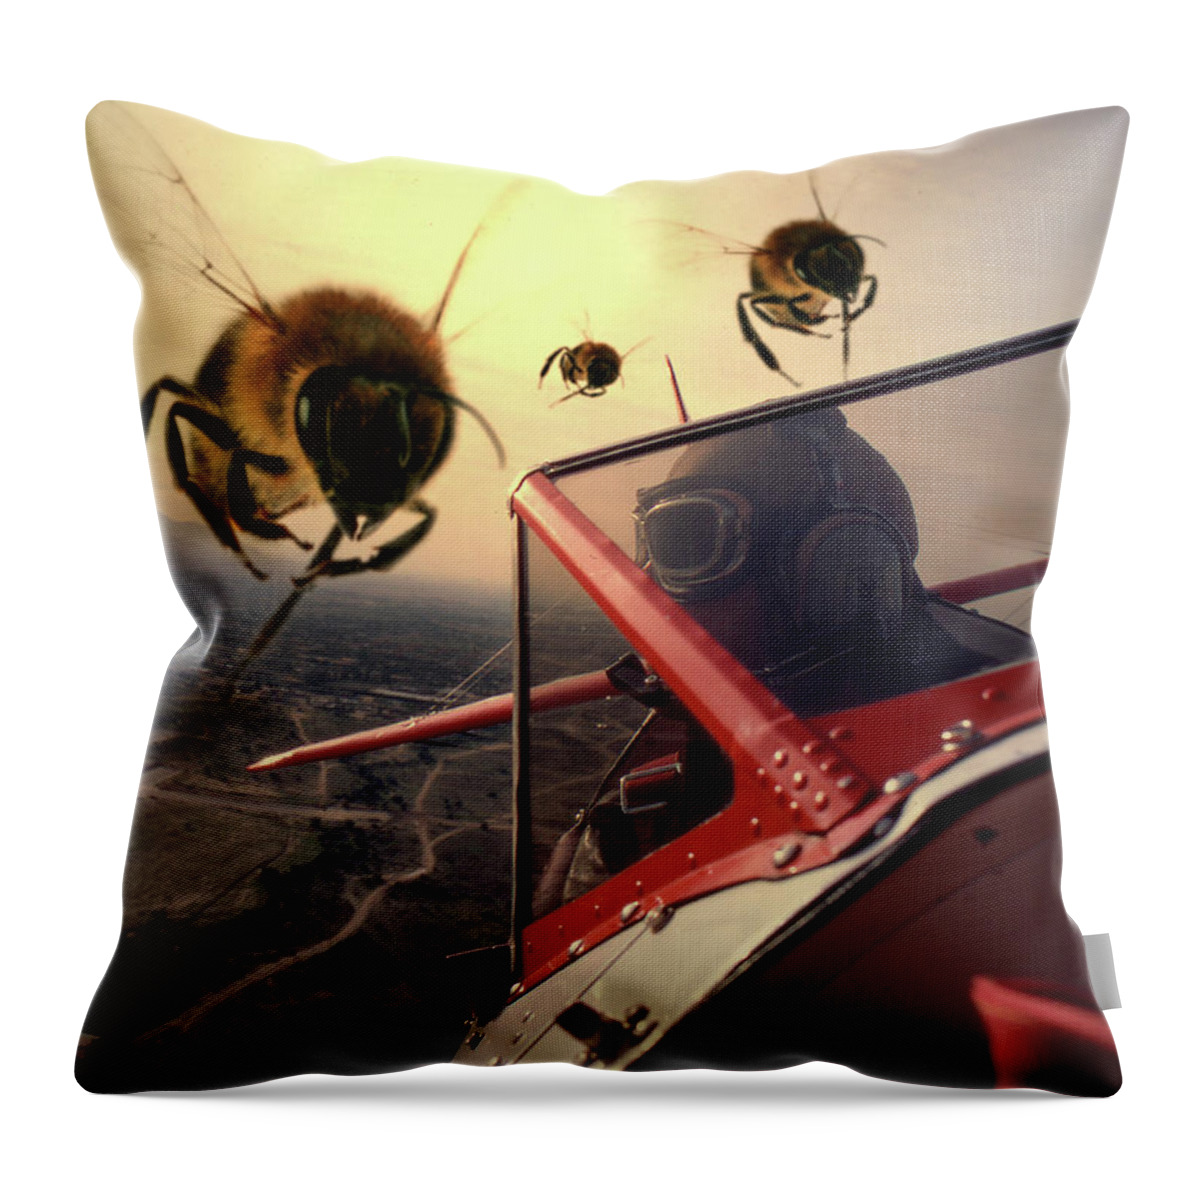 Fantasy Throw Pillow featuring the photograph Bee Attack 2 by Jim Painter